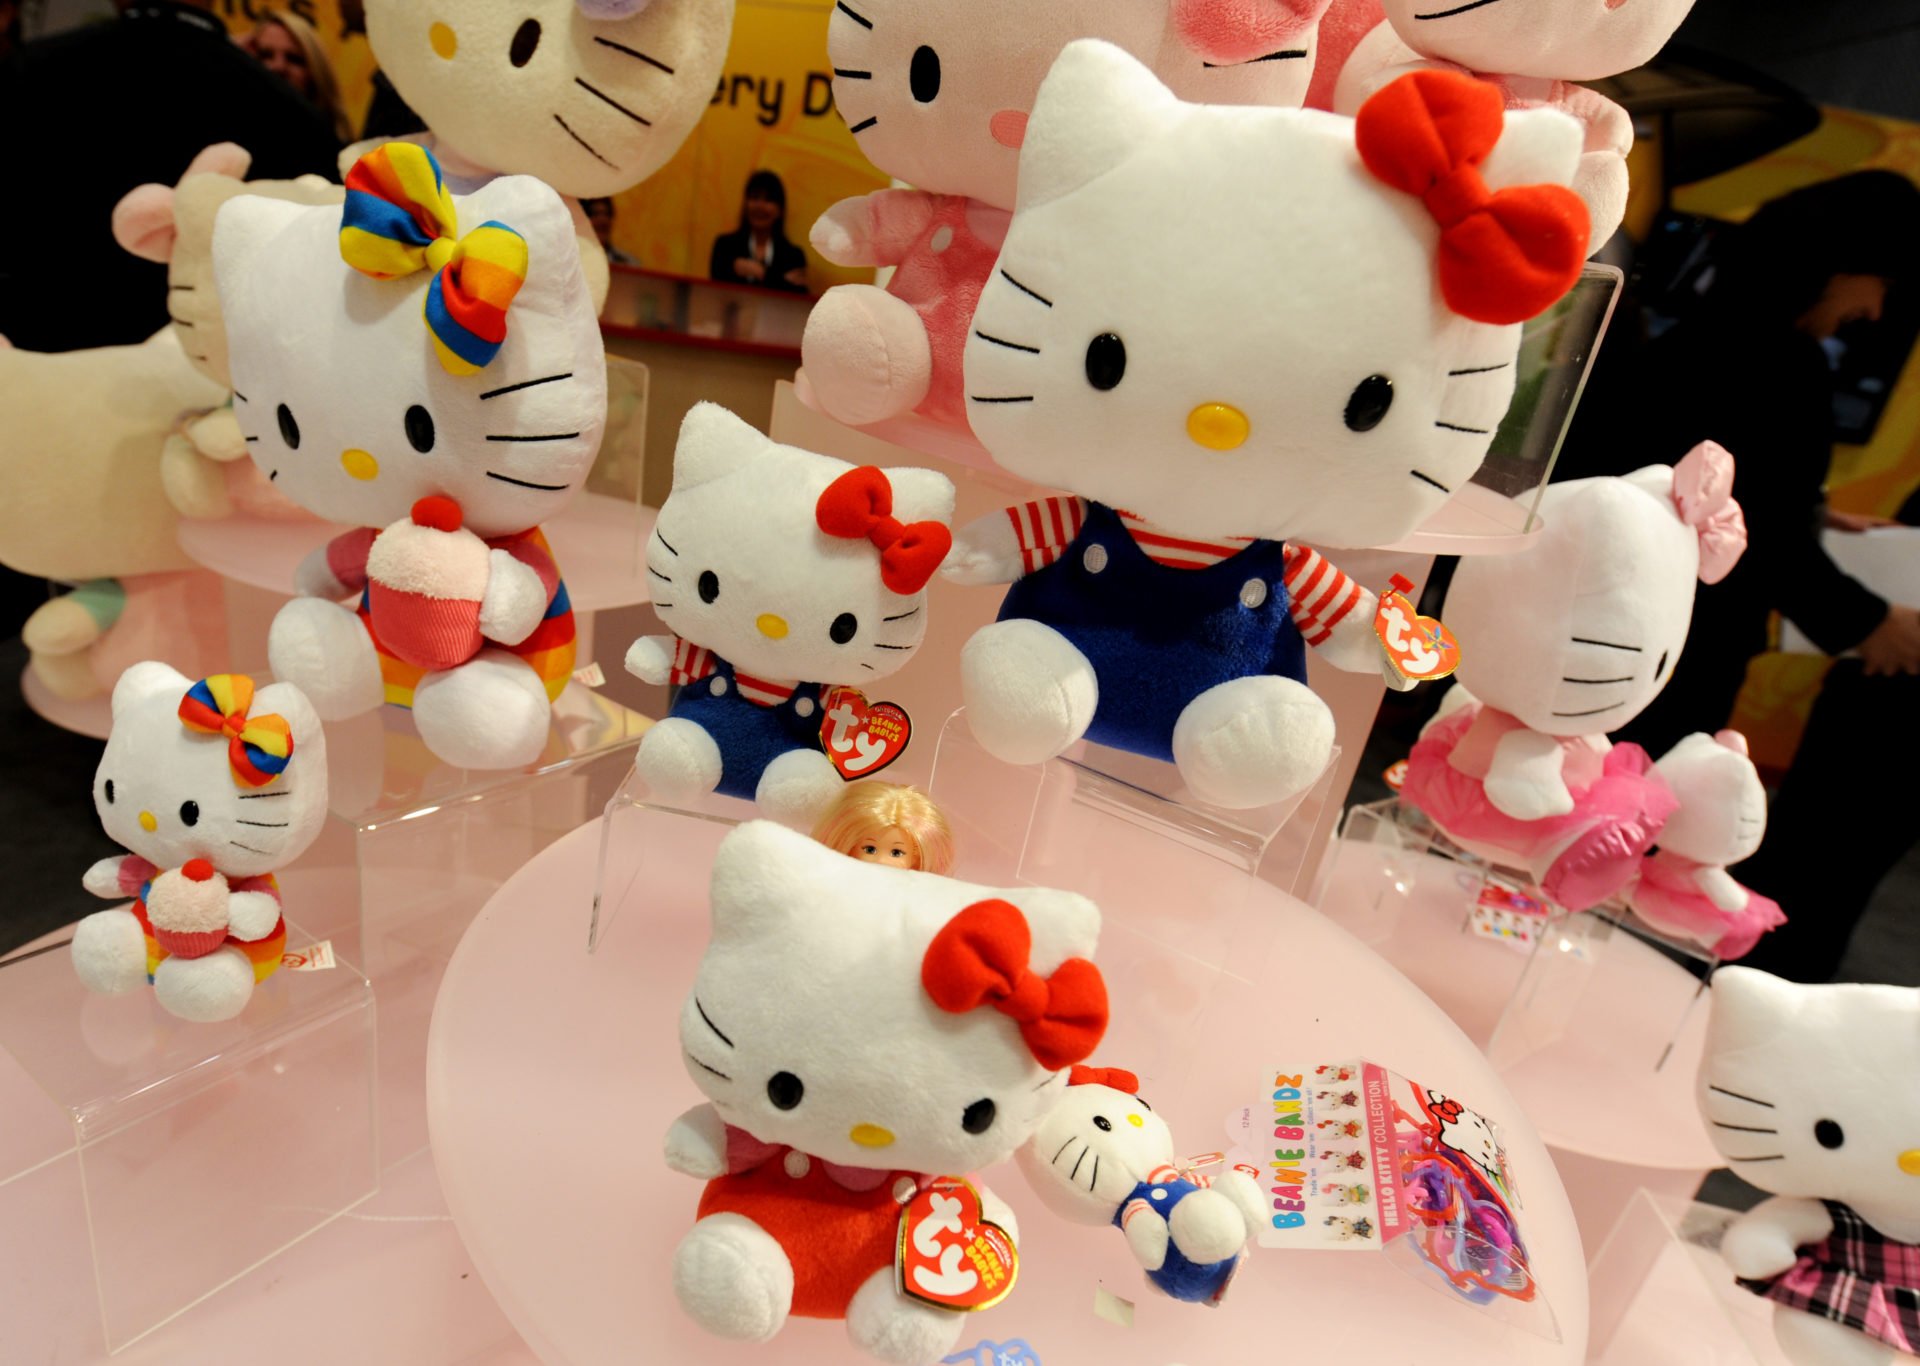 Hello Kitty dolls by Sanrio are displaye